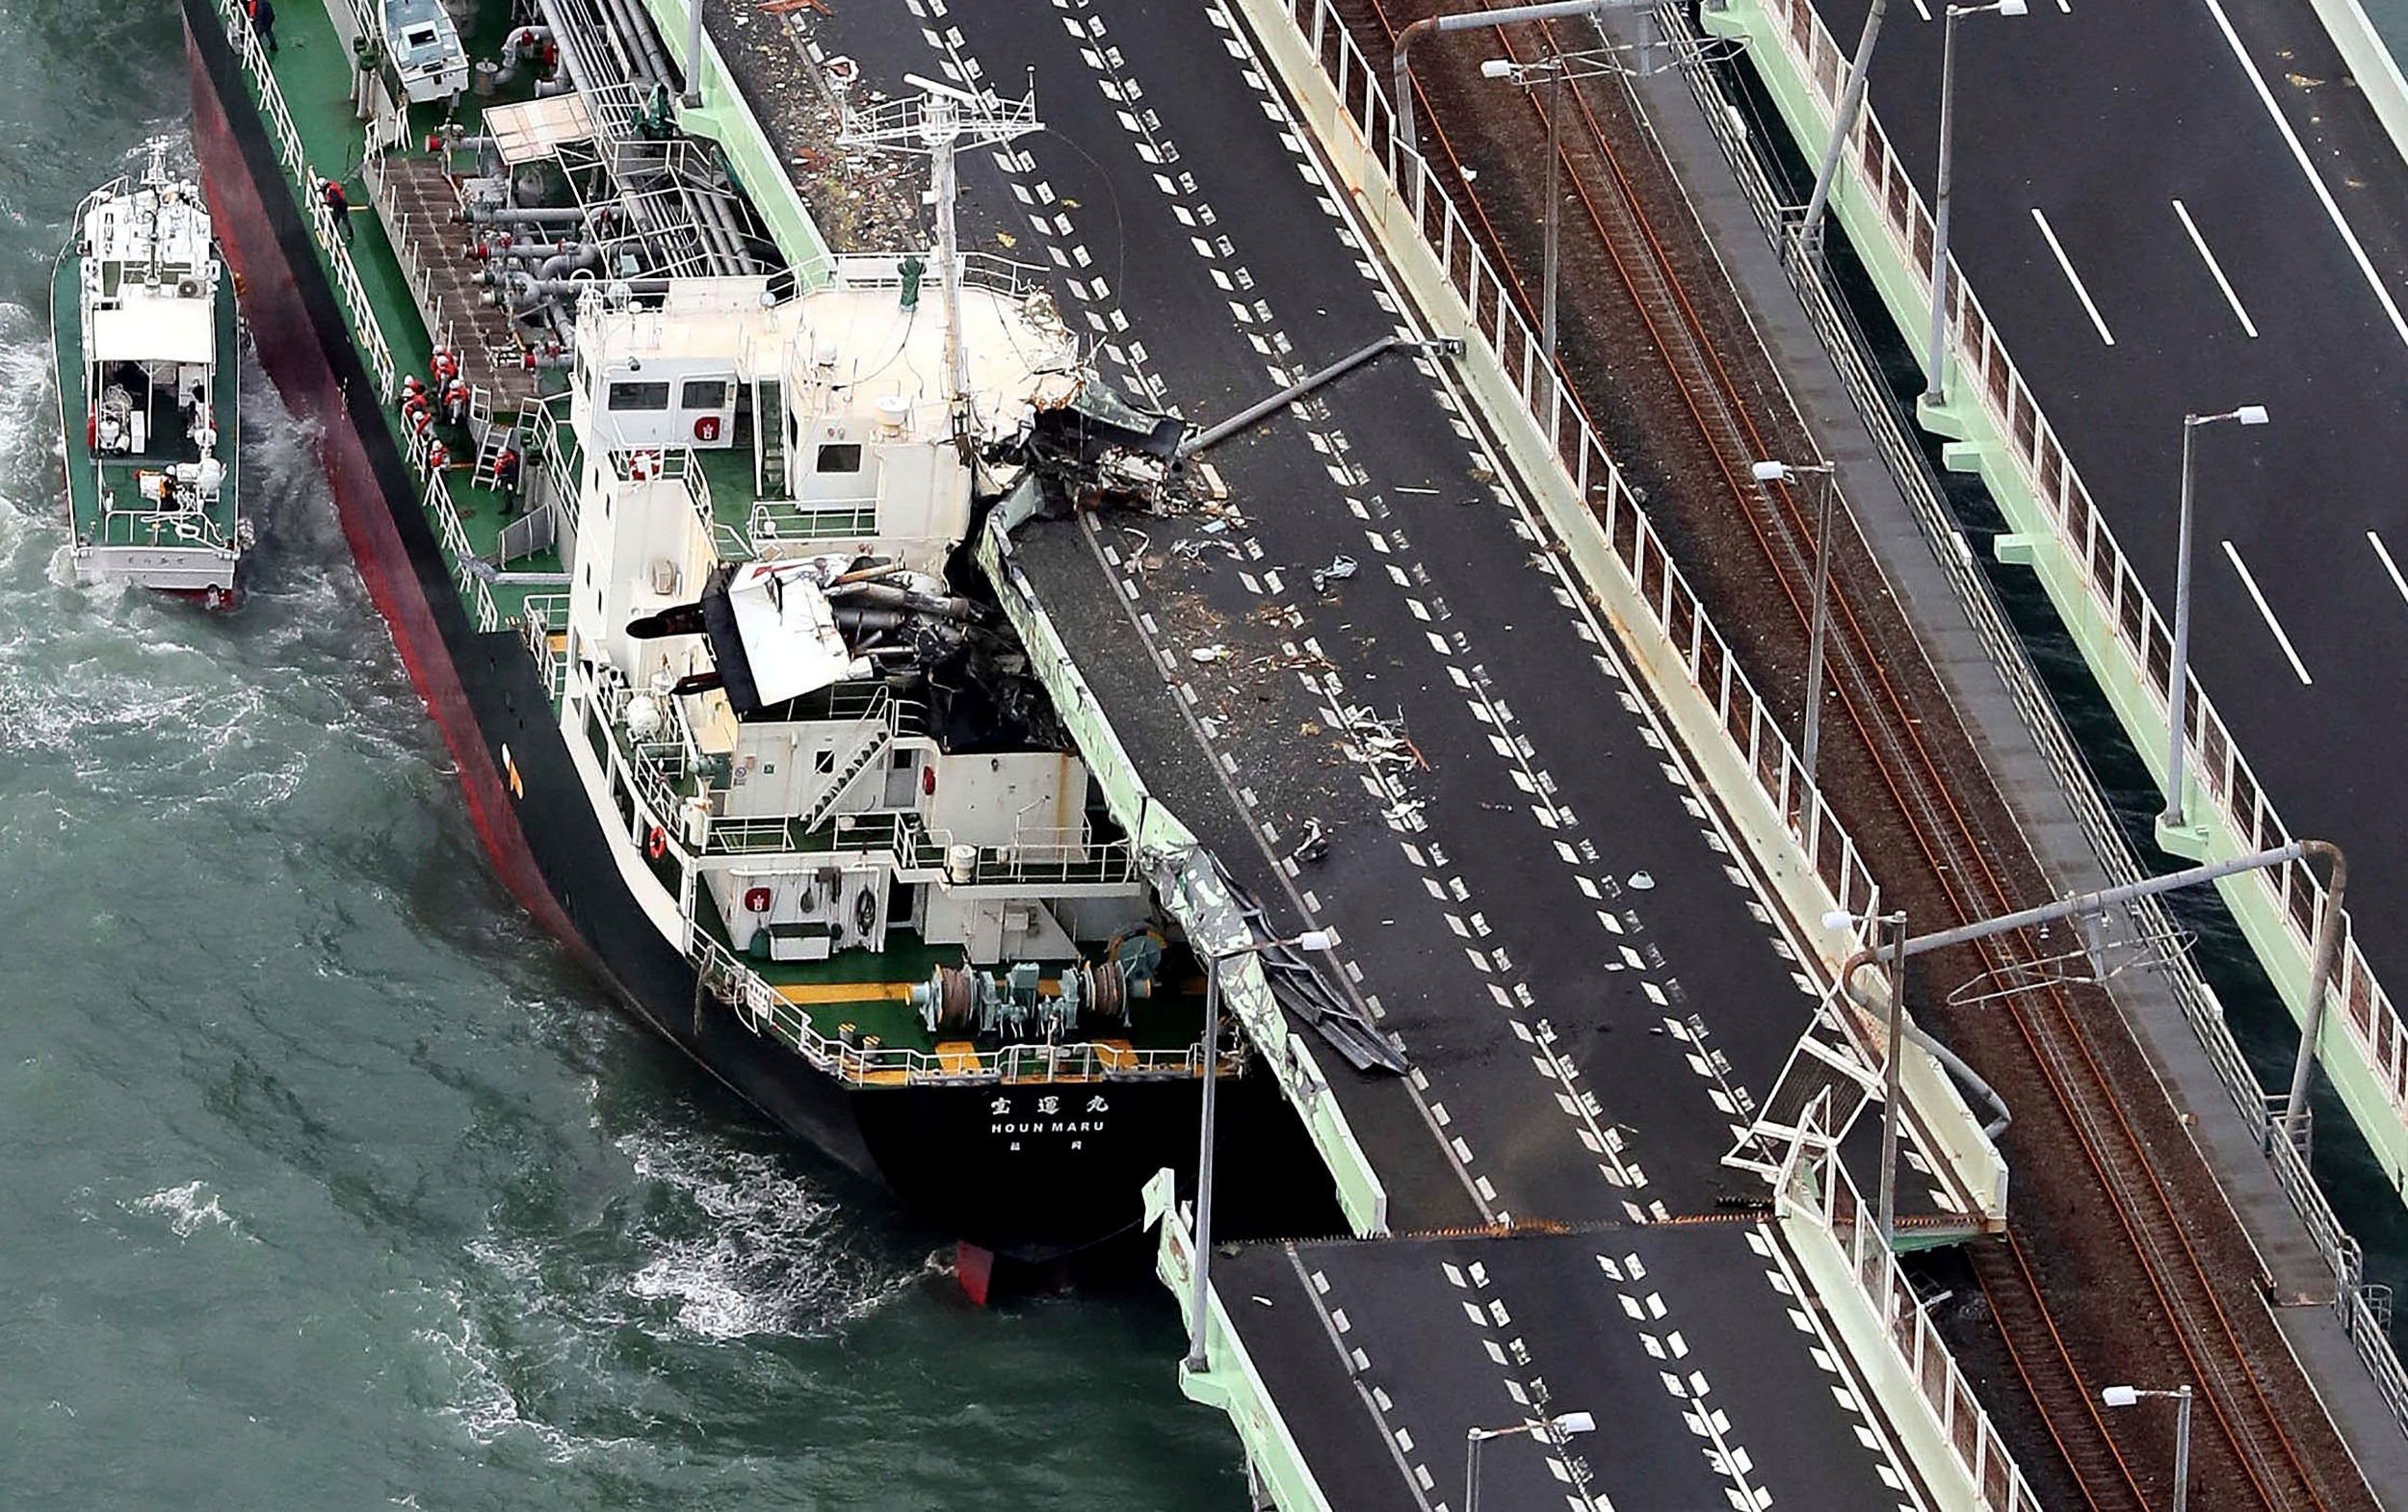 The tanker slammed into a bridge connecting Kansai airport to the mainland